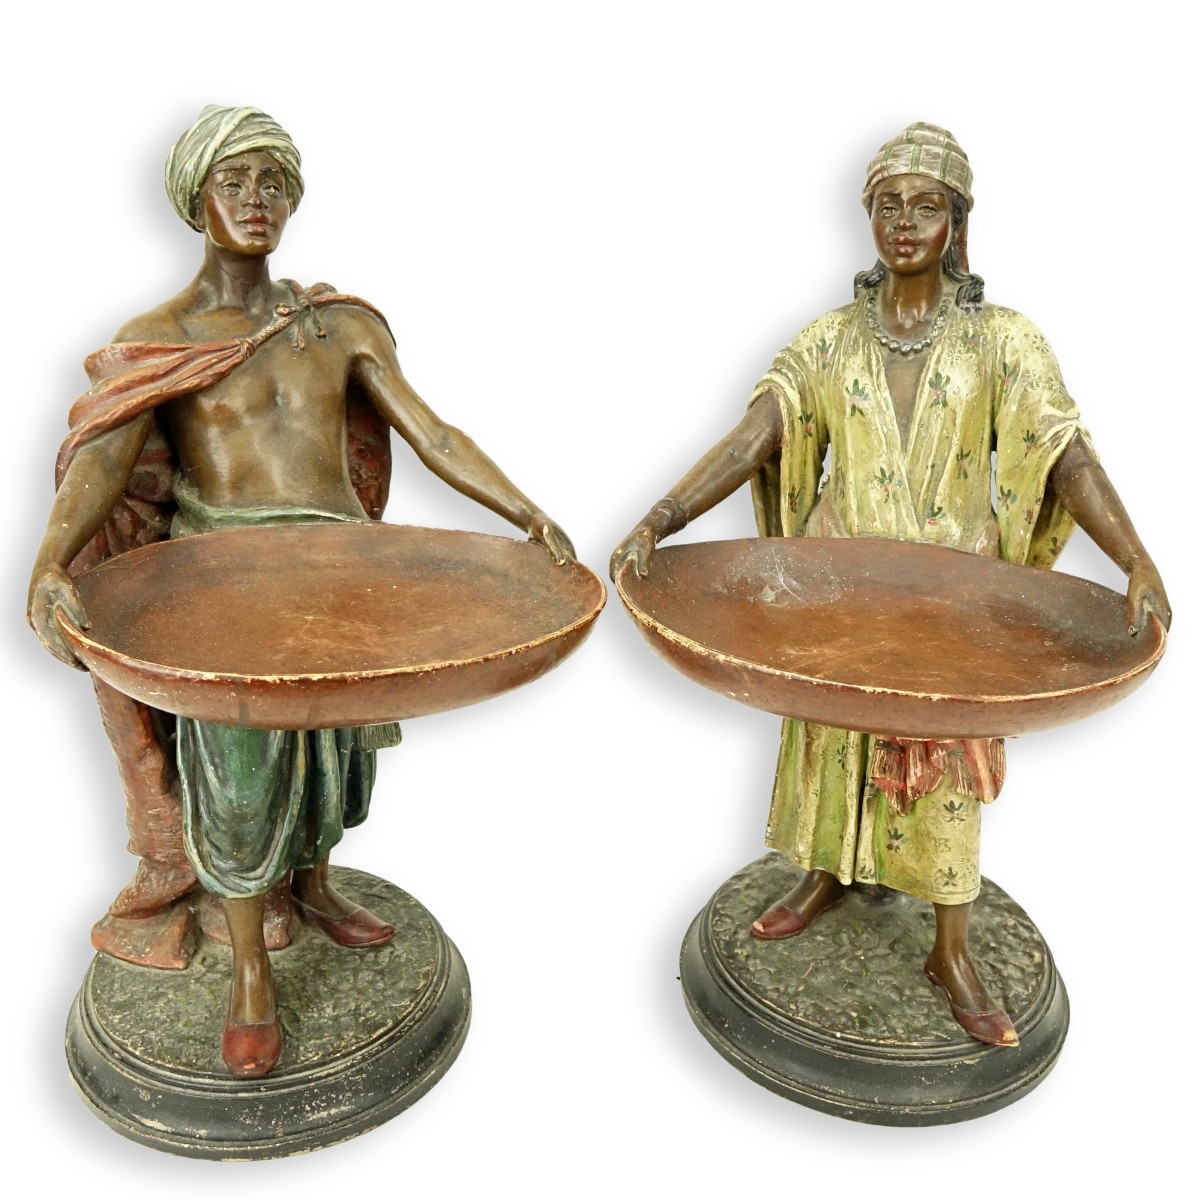 Pair of Orientalist Polychrome Pottery Figures